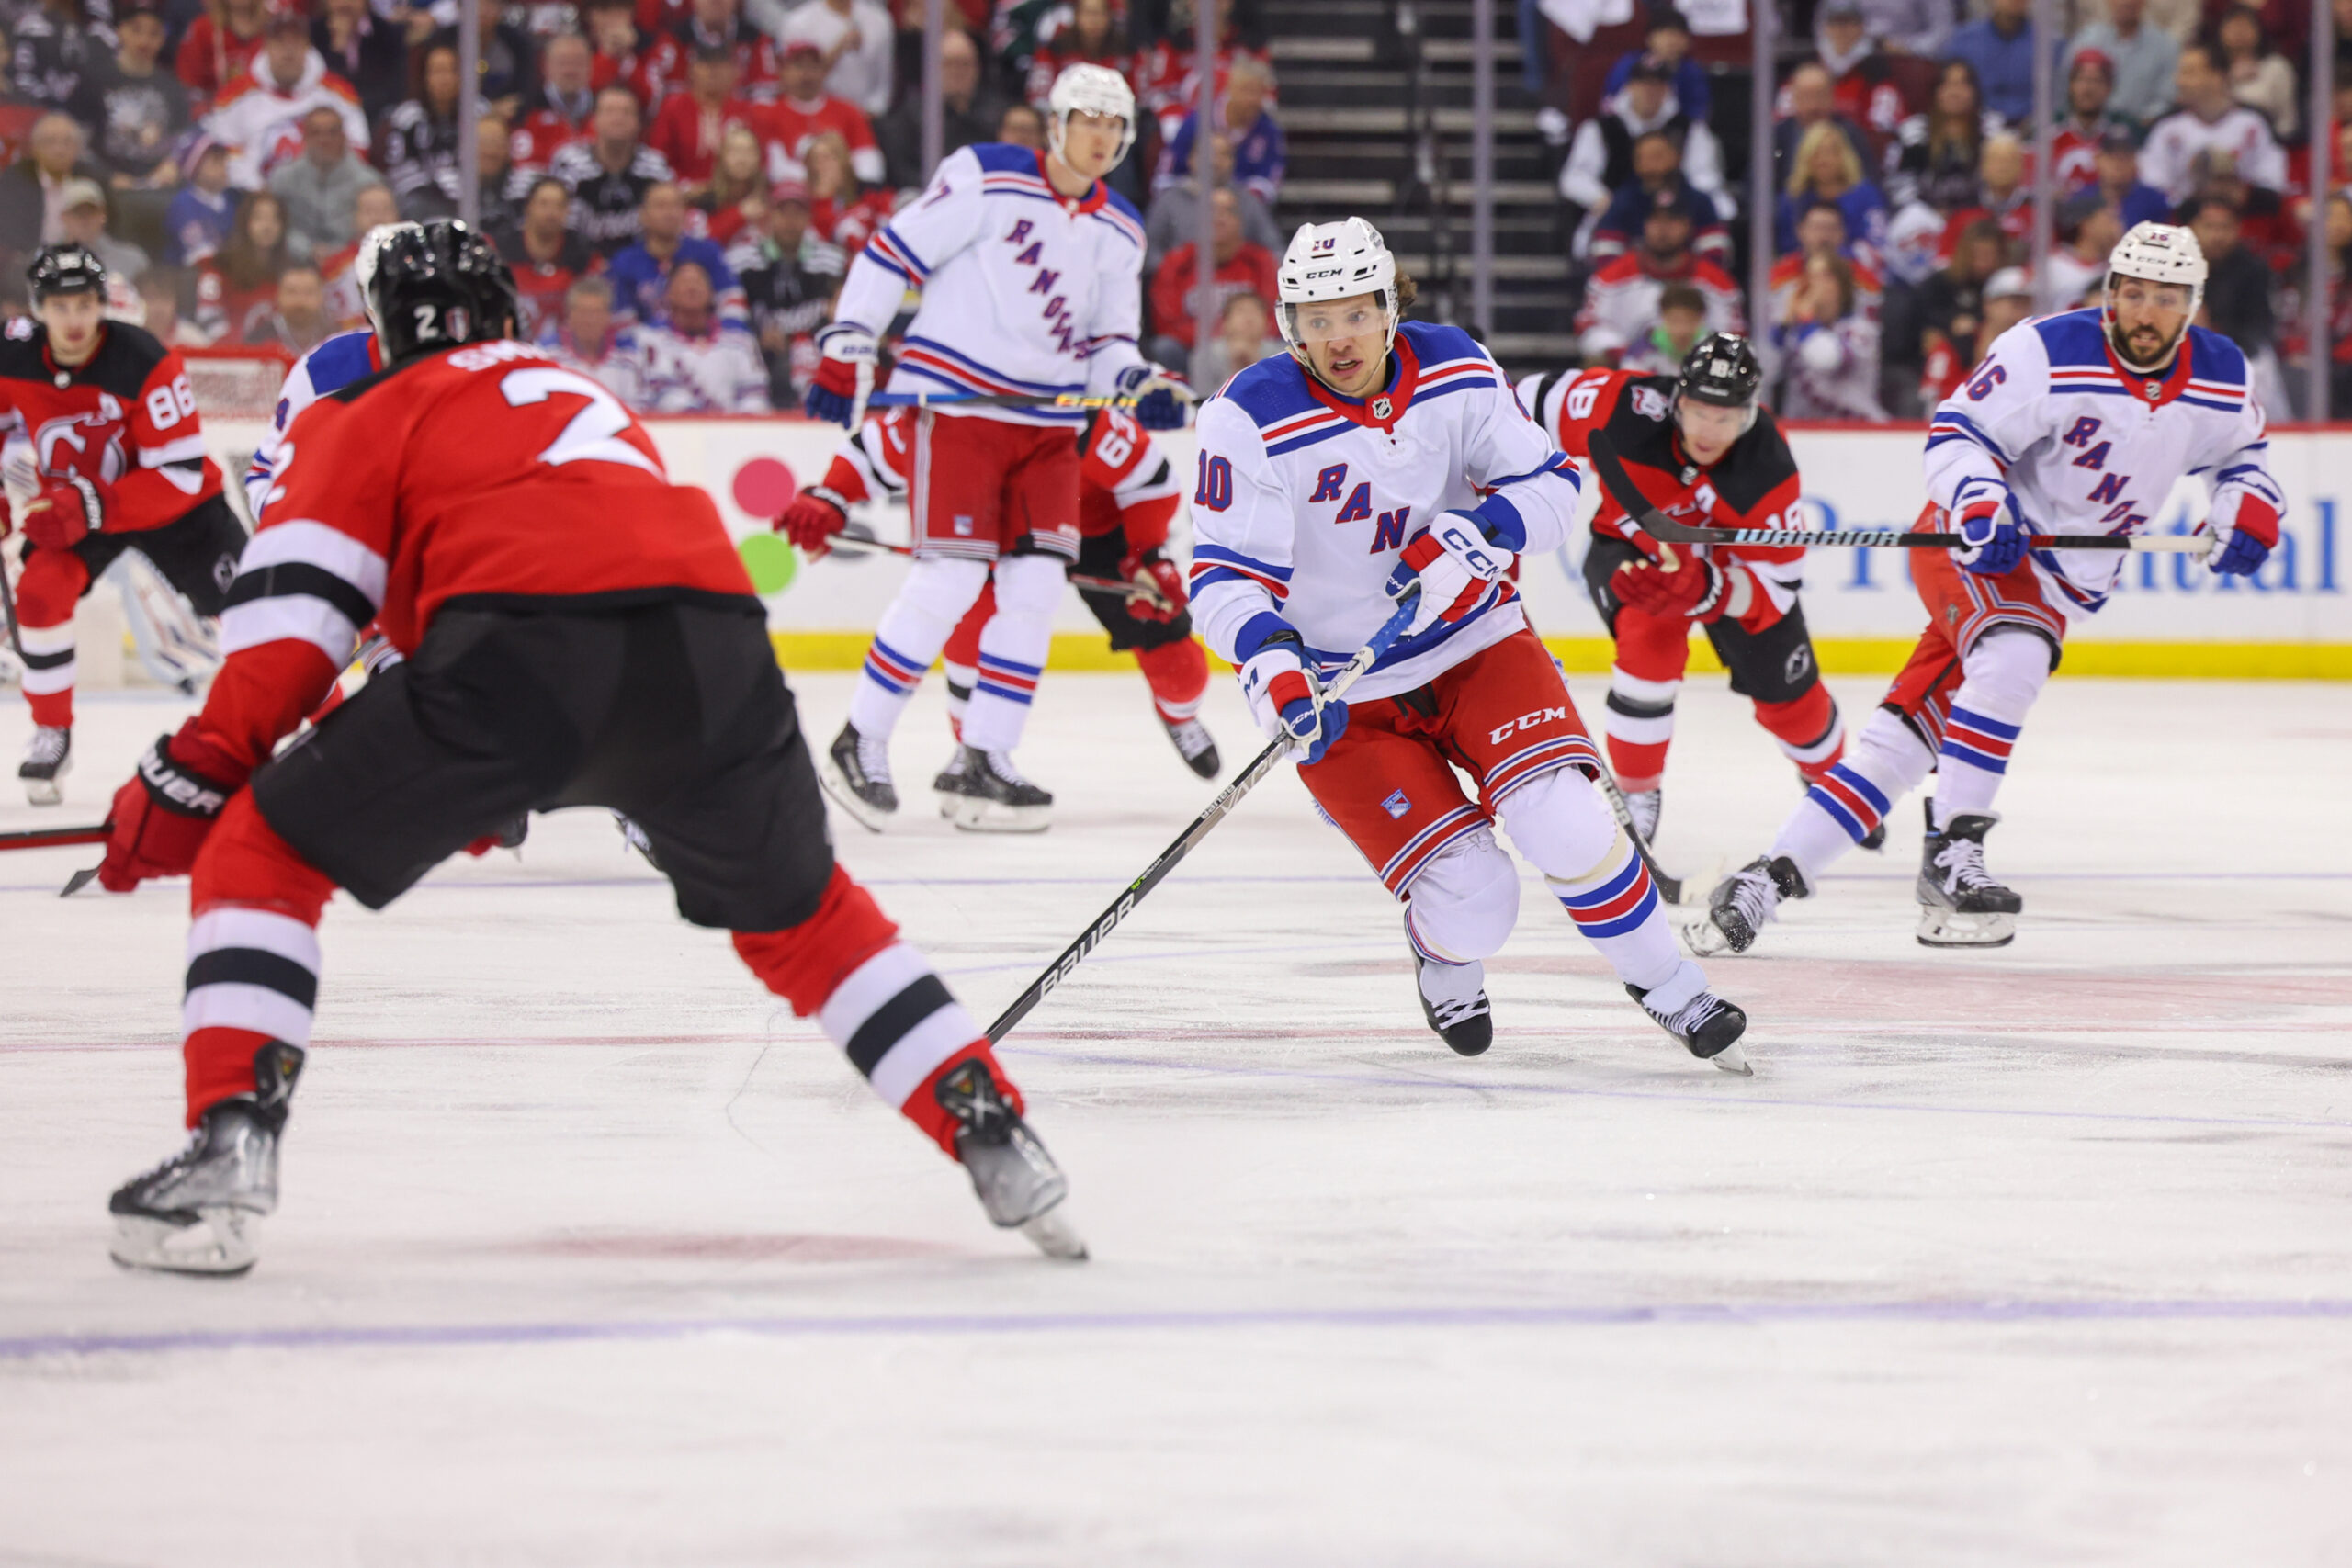 New Jersey Devils: What Would Be A Good Contract For Artemi Panarin?